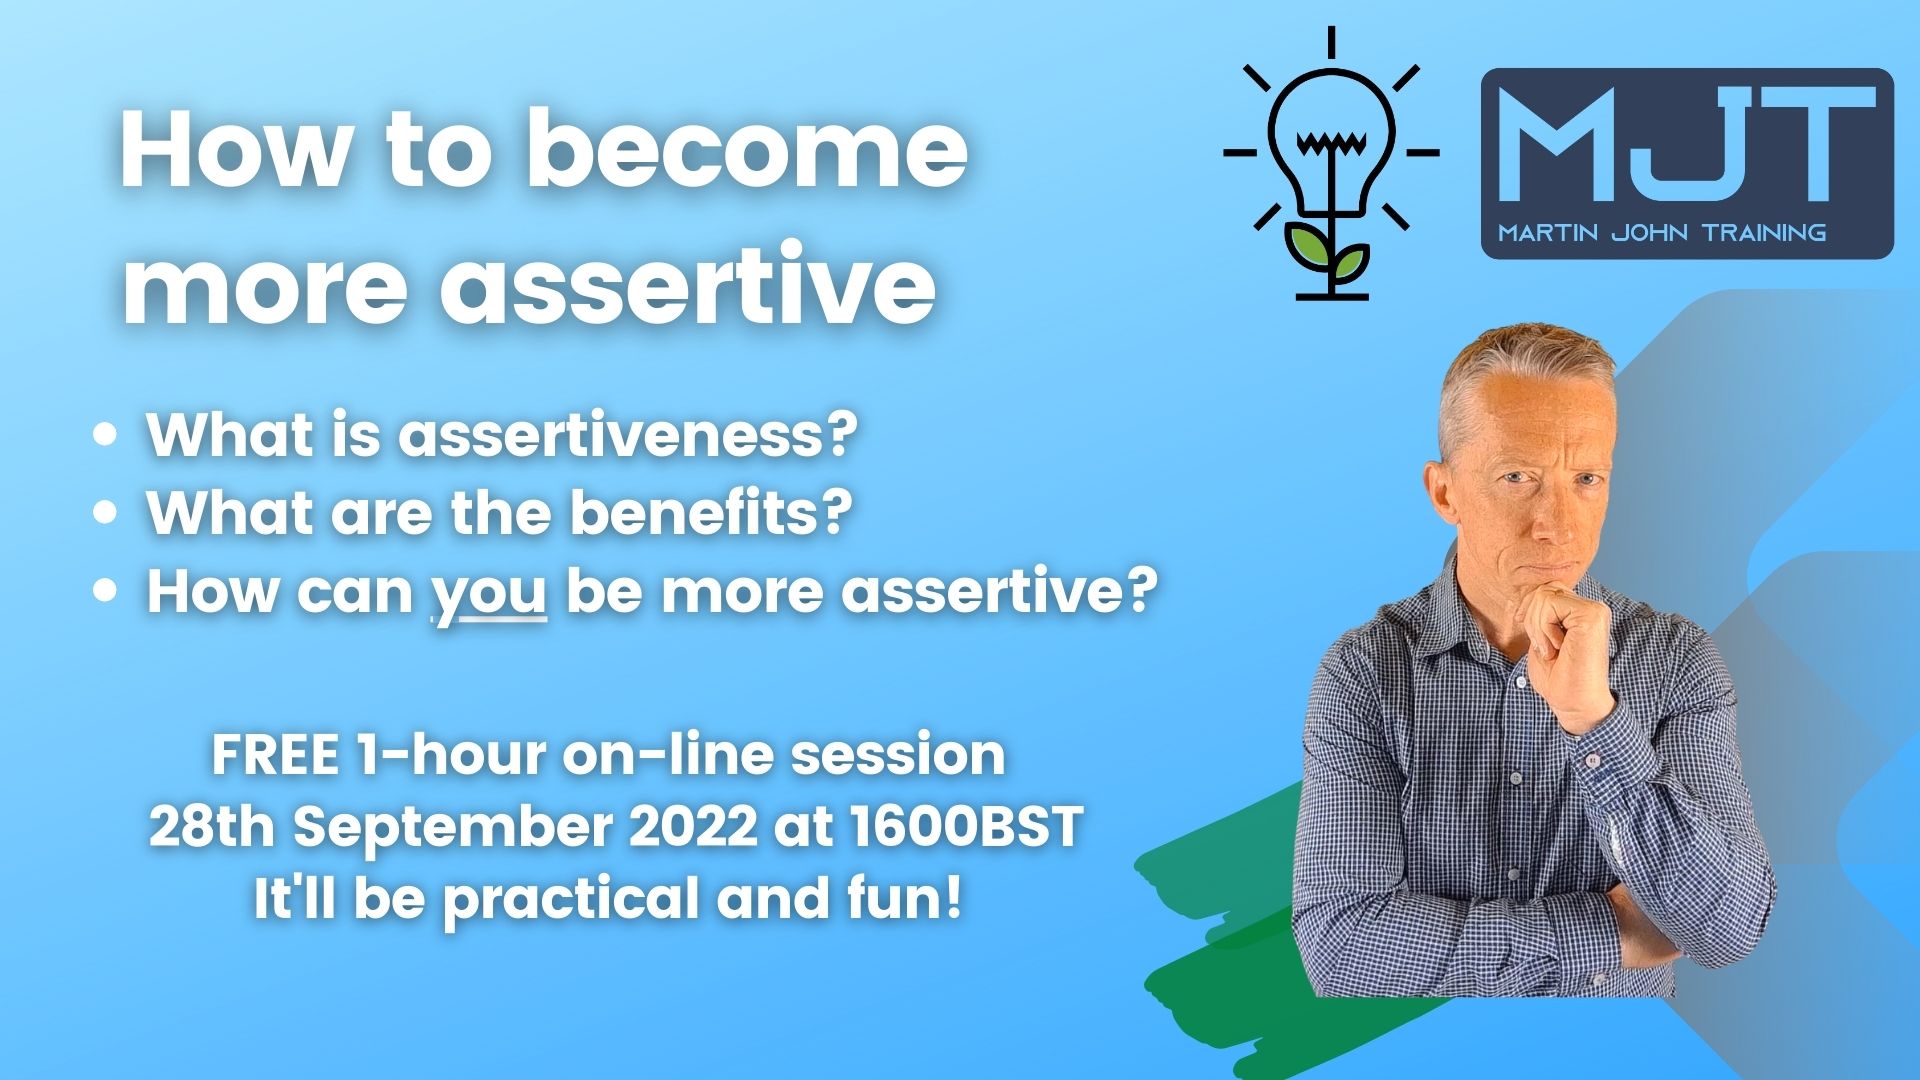 Assertiveness – How to become more assertive